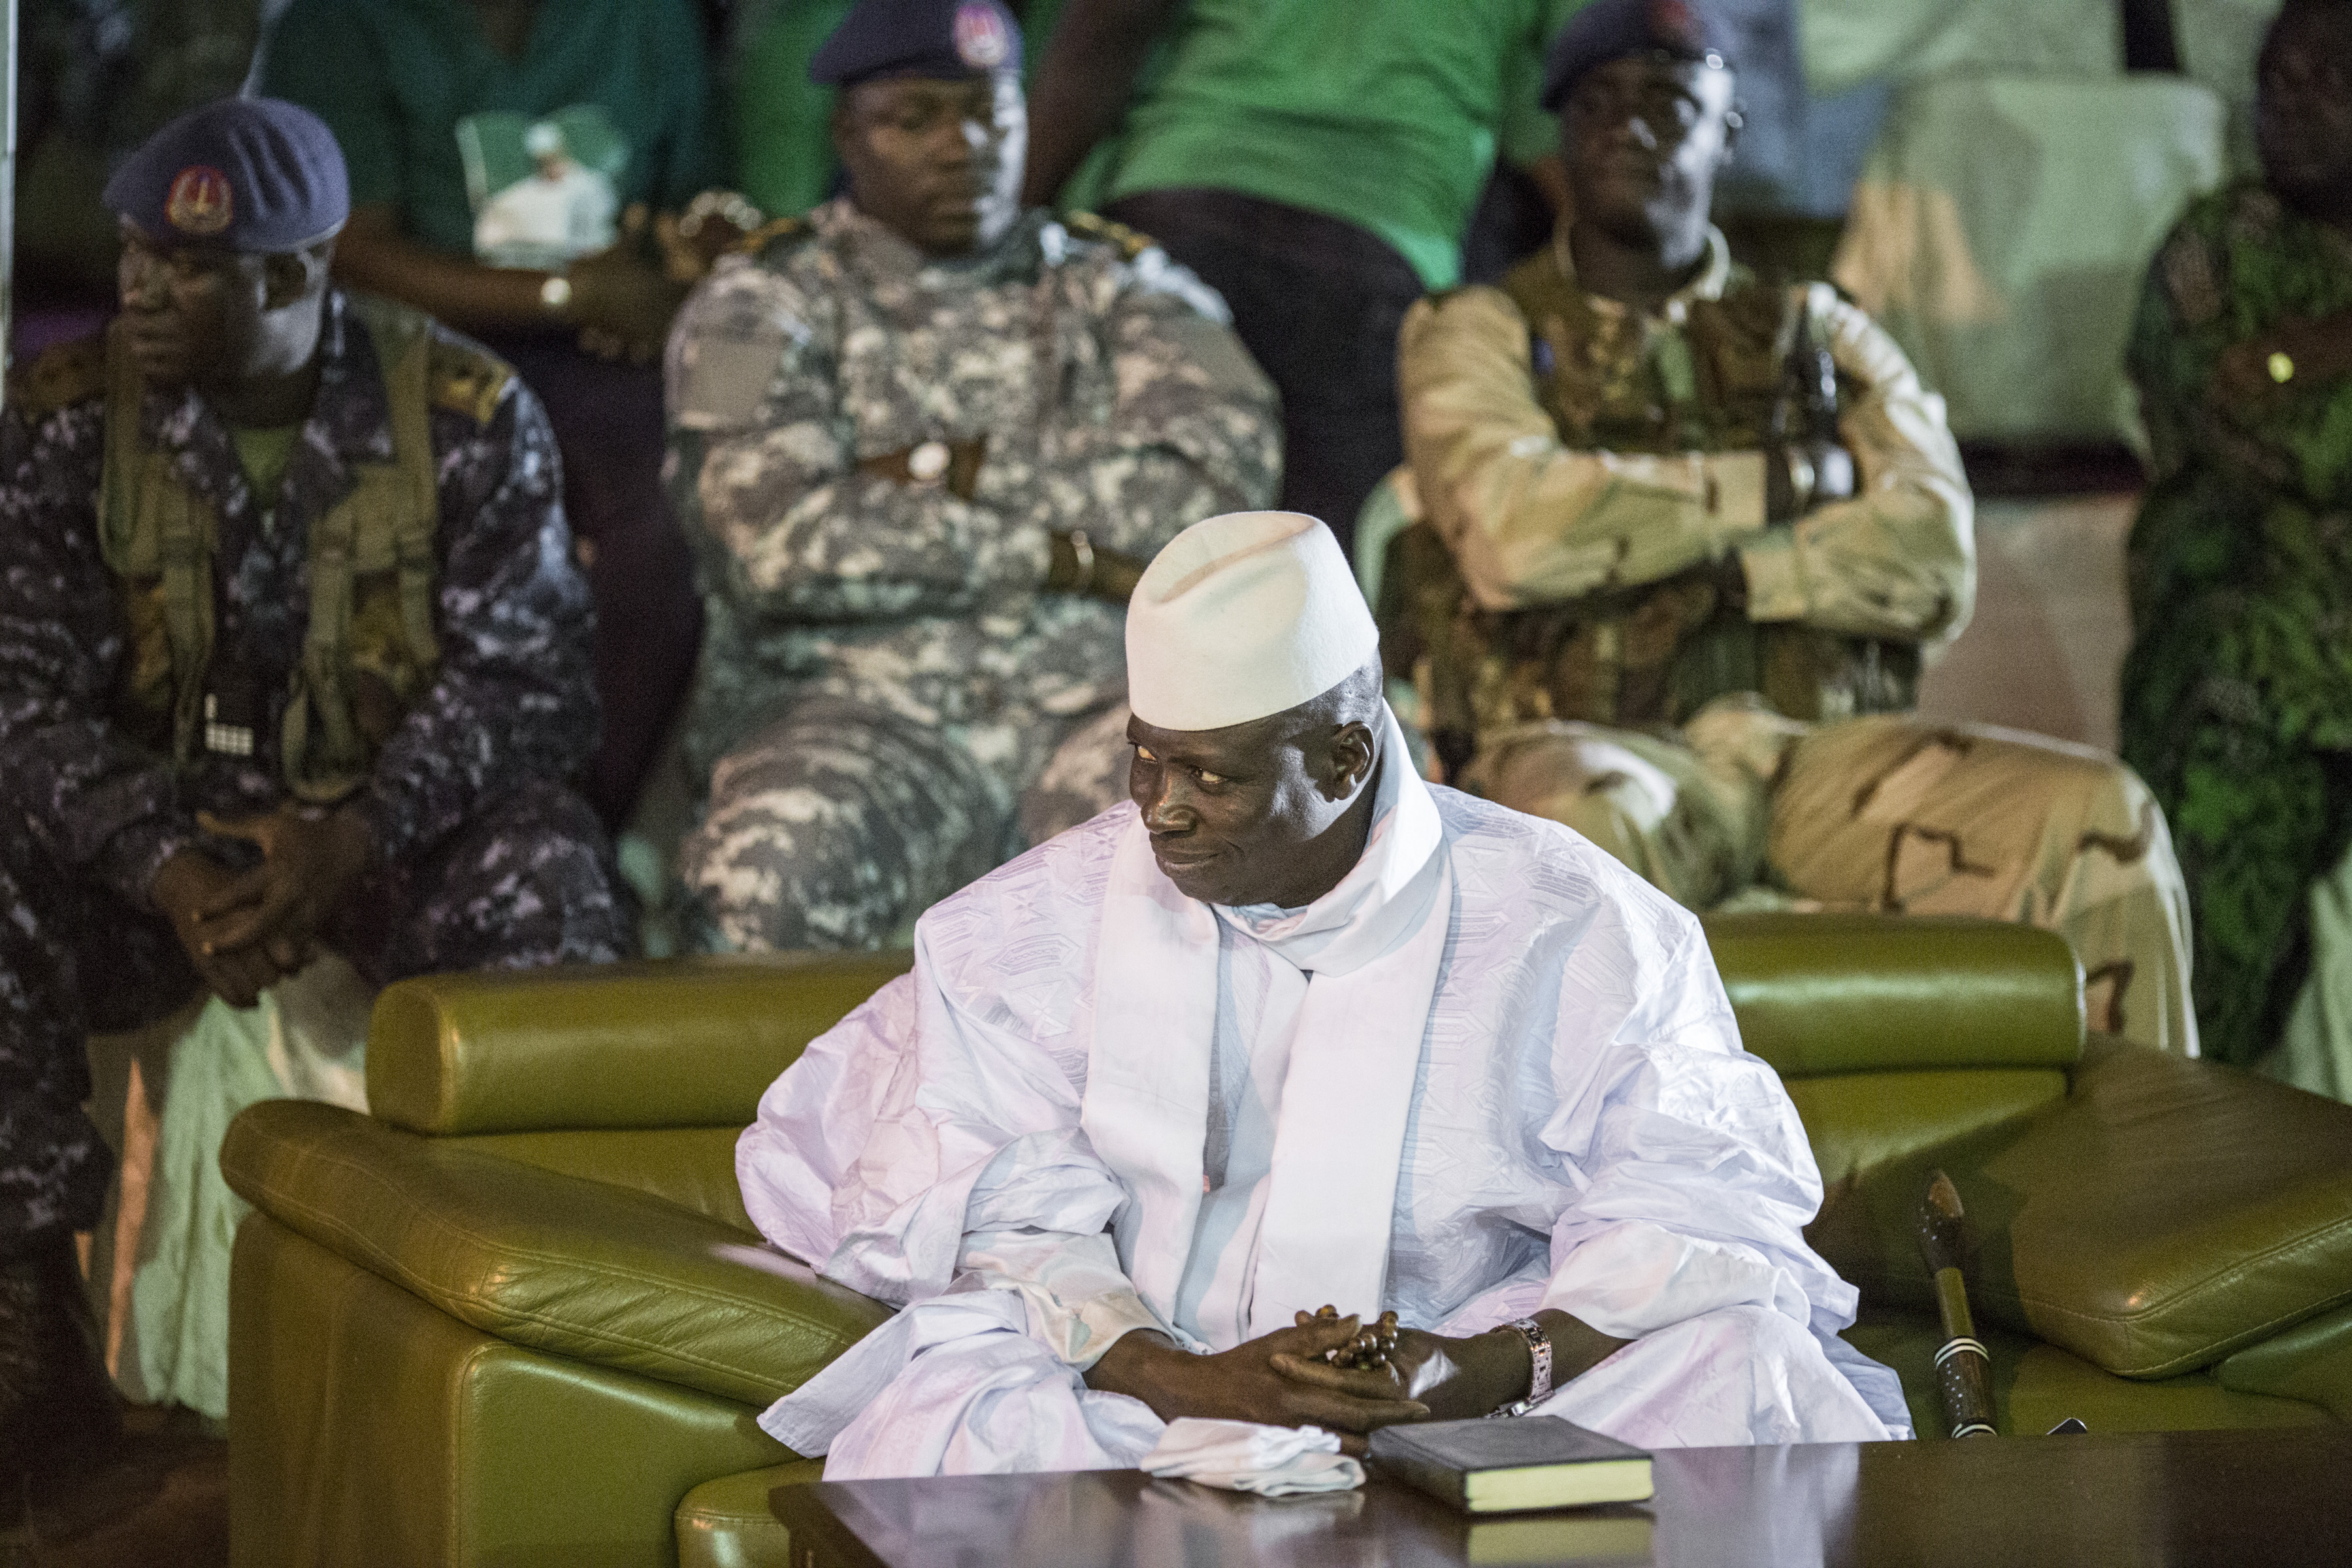 Incumbent Gambian President Yahya Jammeh looks on in Banjul on November 29, 2016, during the closing rally of the electoral campaign of the Alliance for Patriotic Reorientation and Construction (APRC).